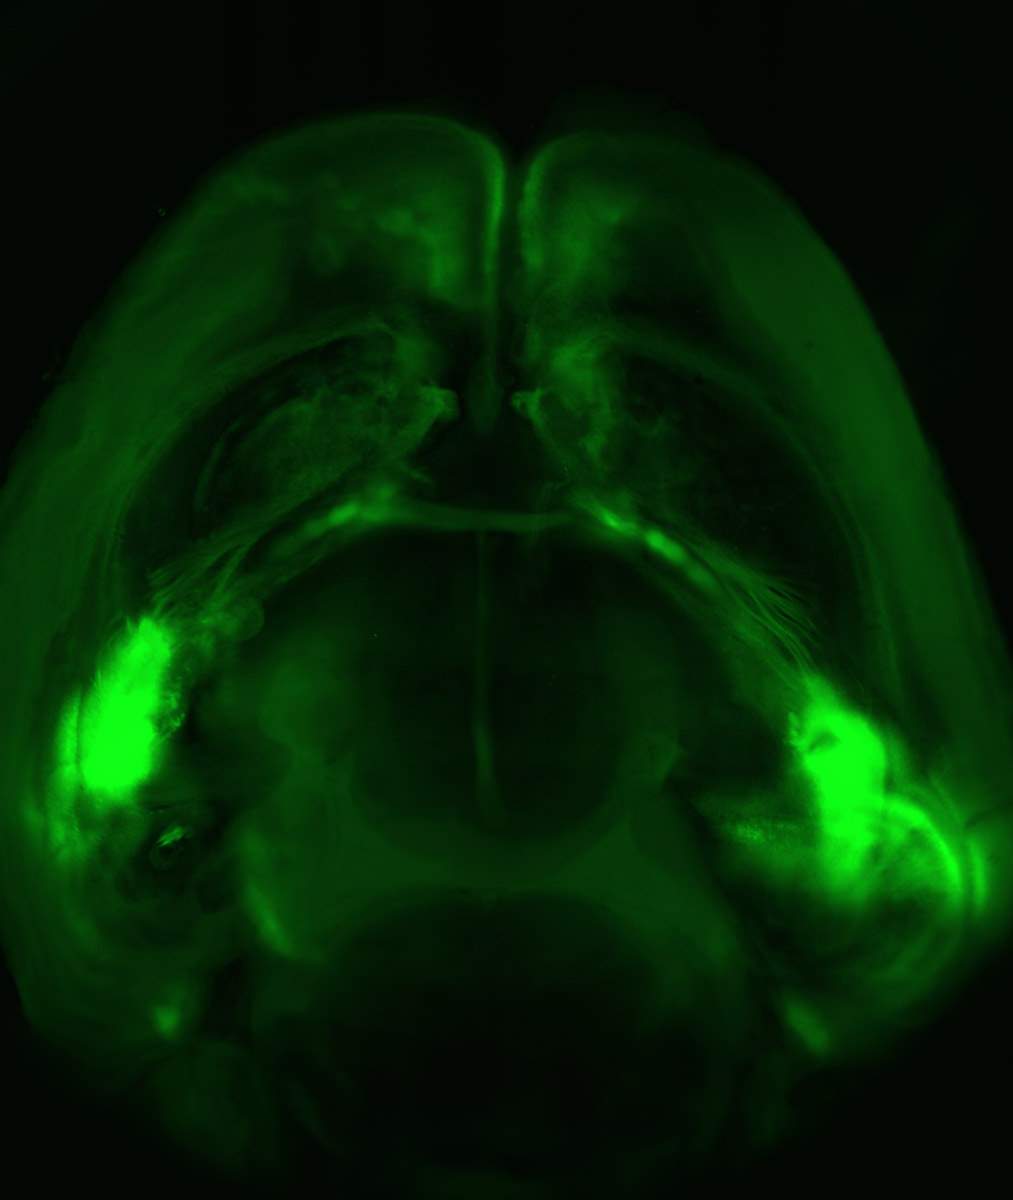 An entire mouse brain viewed from above: Neuronal extensions connect the two amygdalas (brightest green spots on both sides of the brain) with the prefrontal cortex (top)